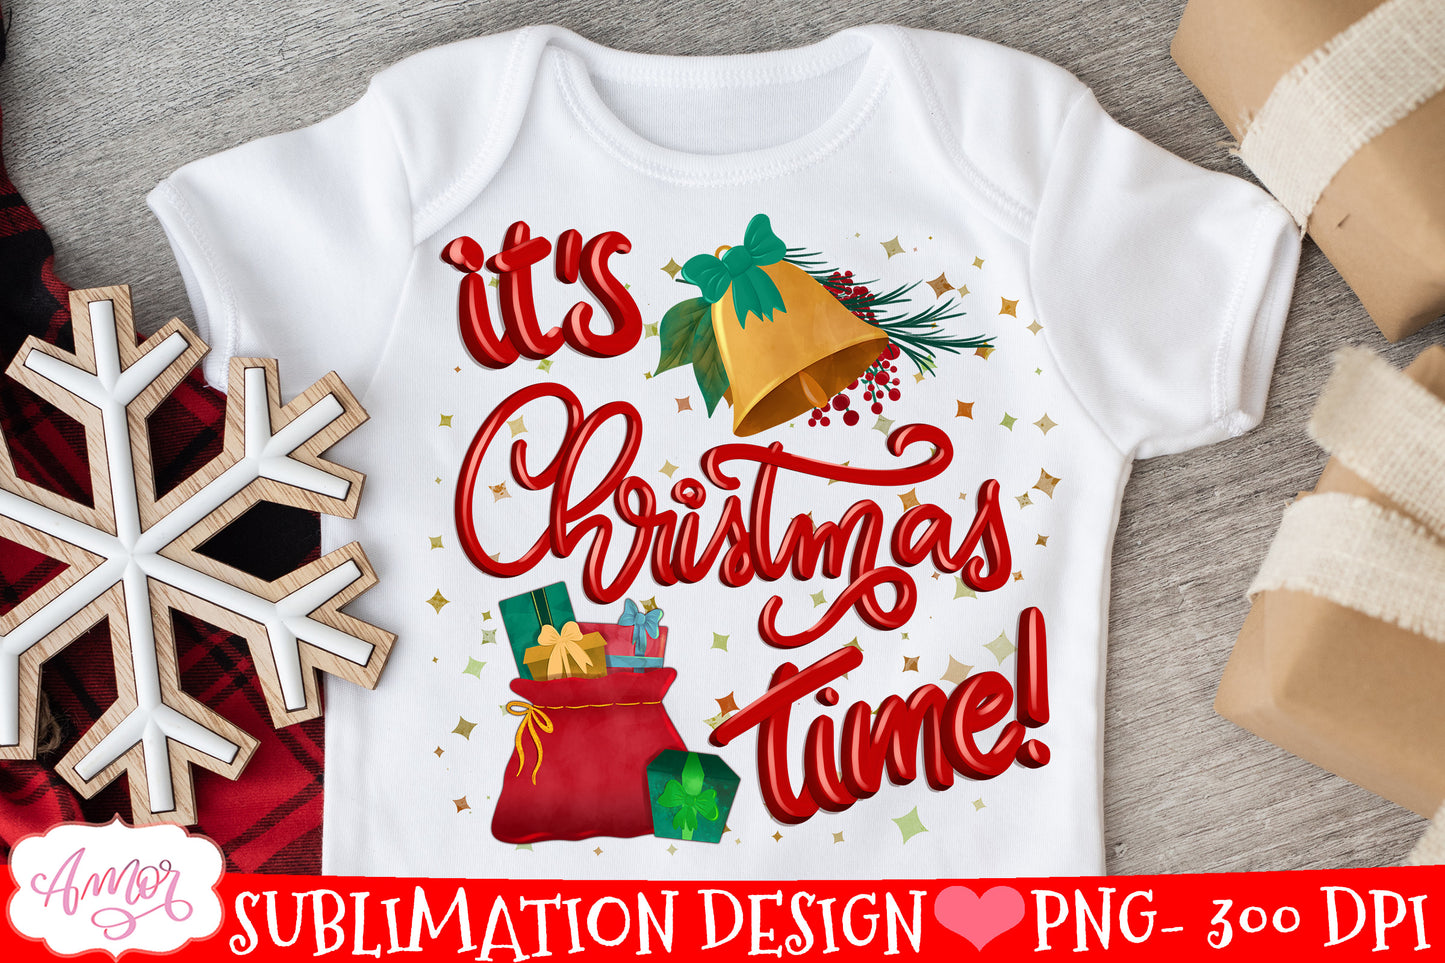 It's Christmas time PNG for sublimation for Children